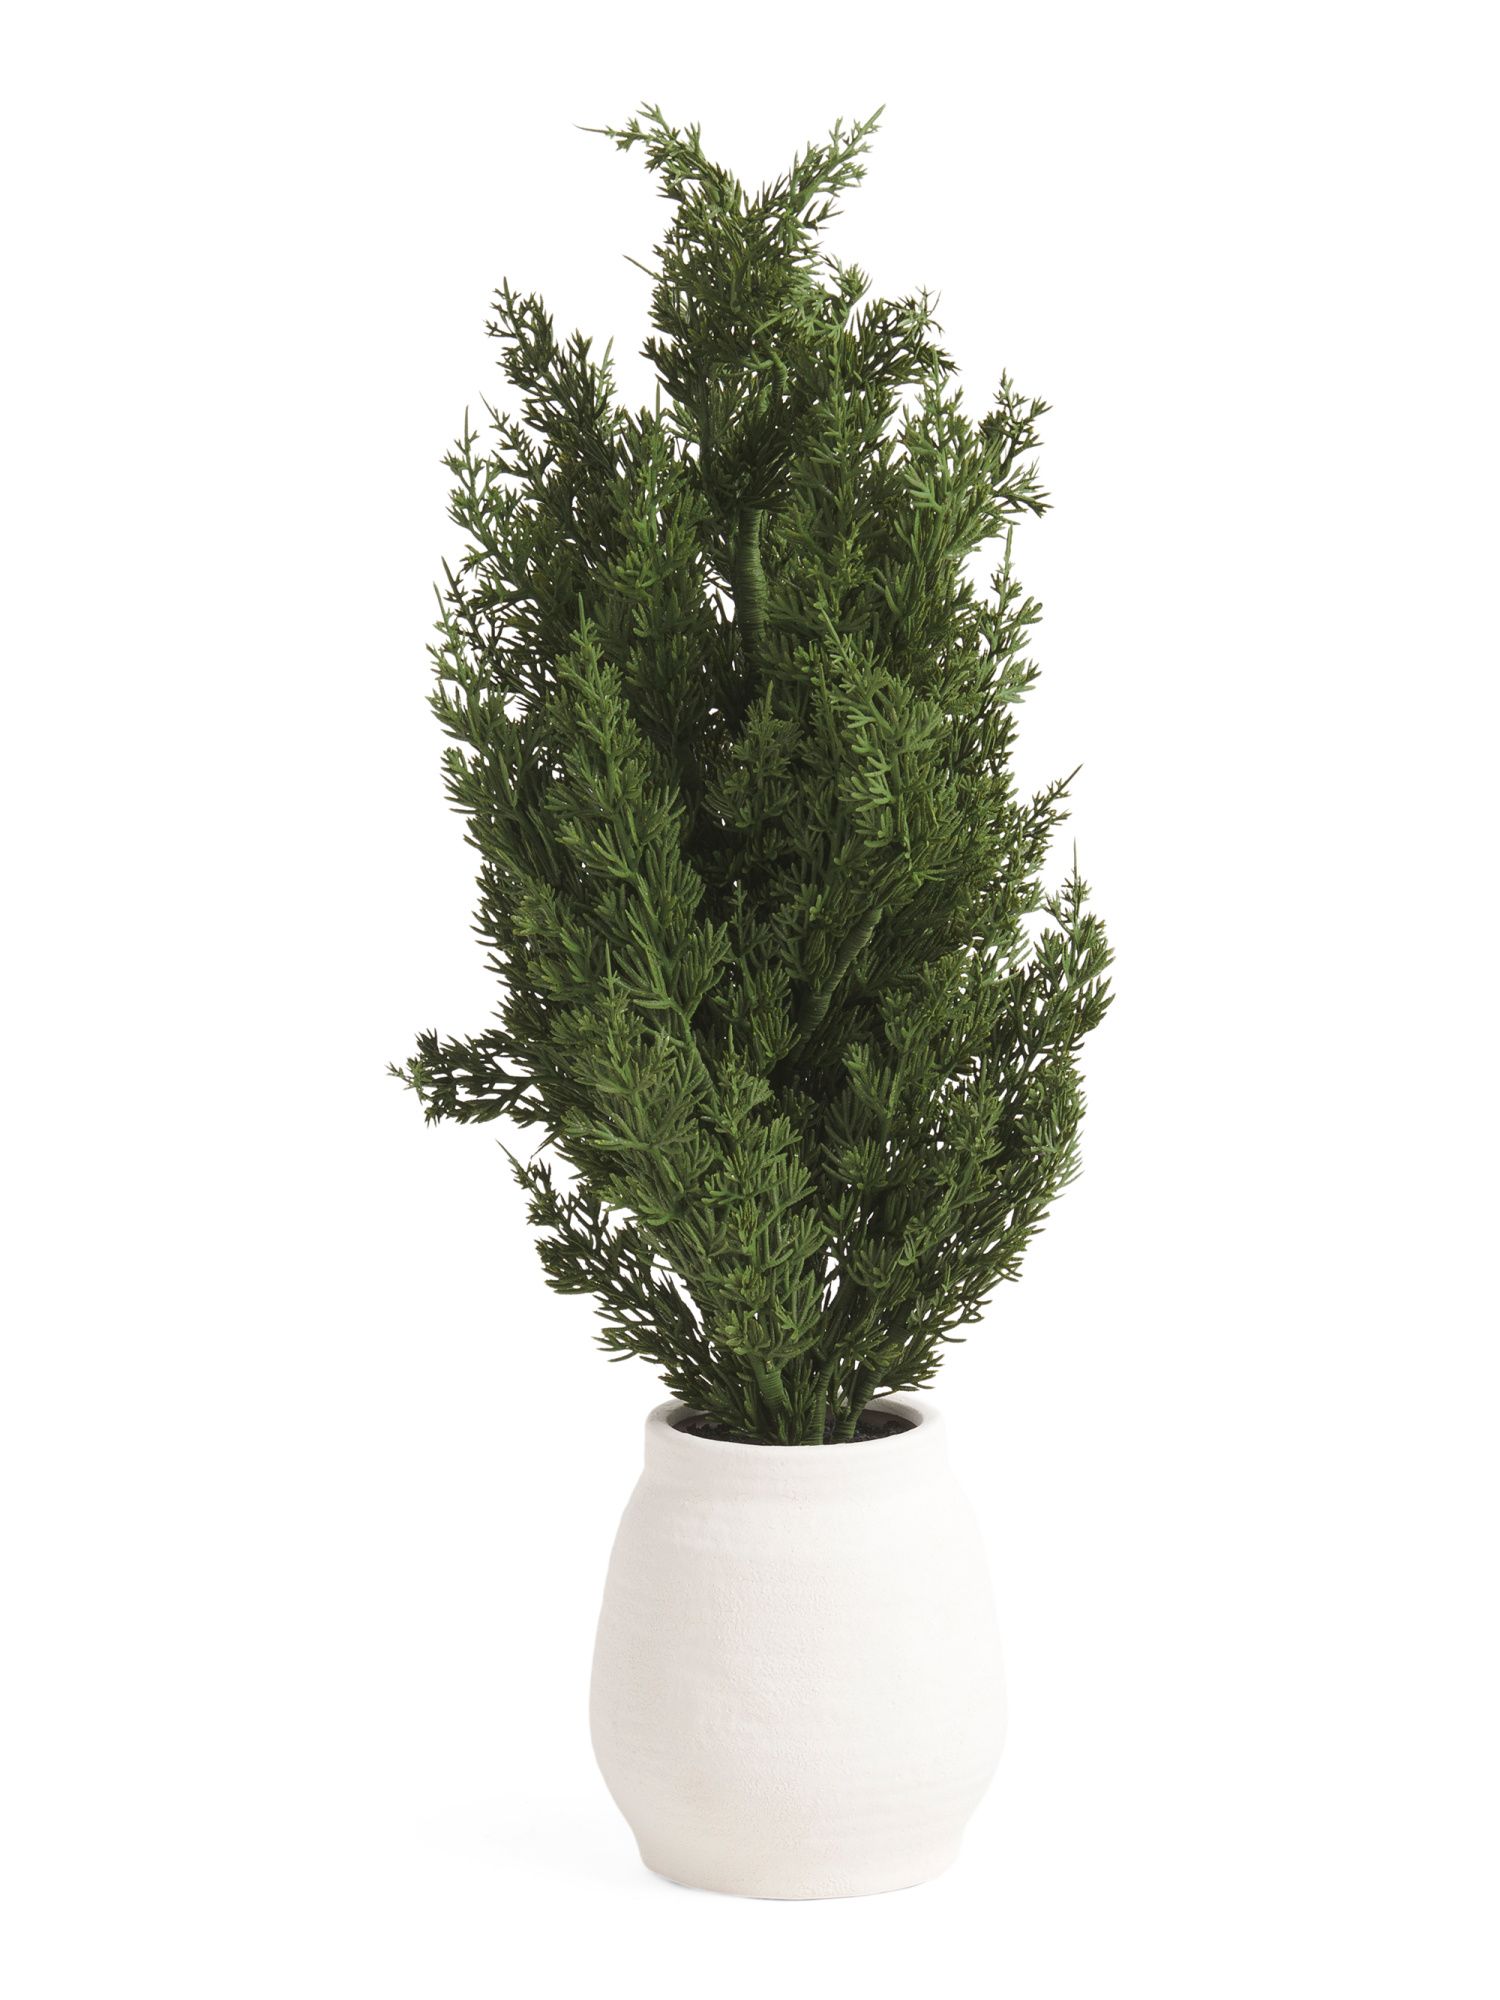 32in Real Touch Pine Tree | TJ Maxx